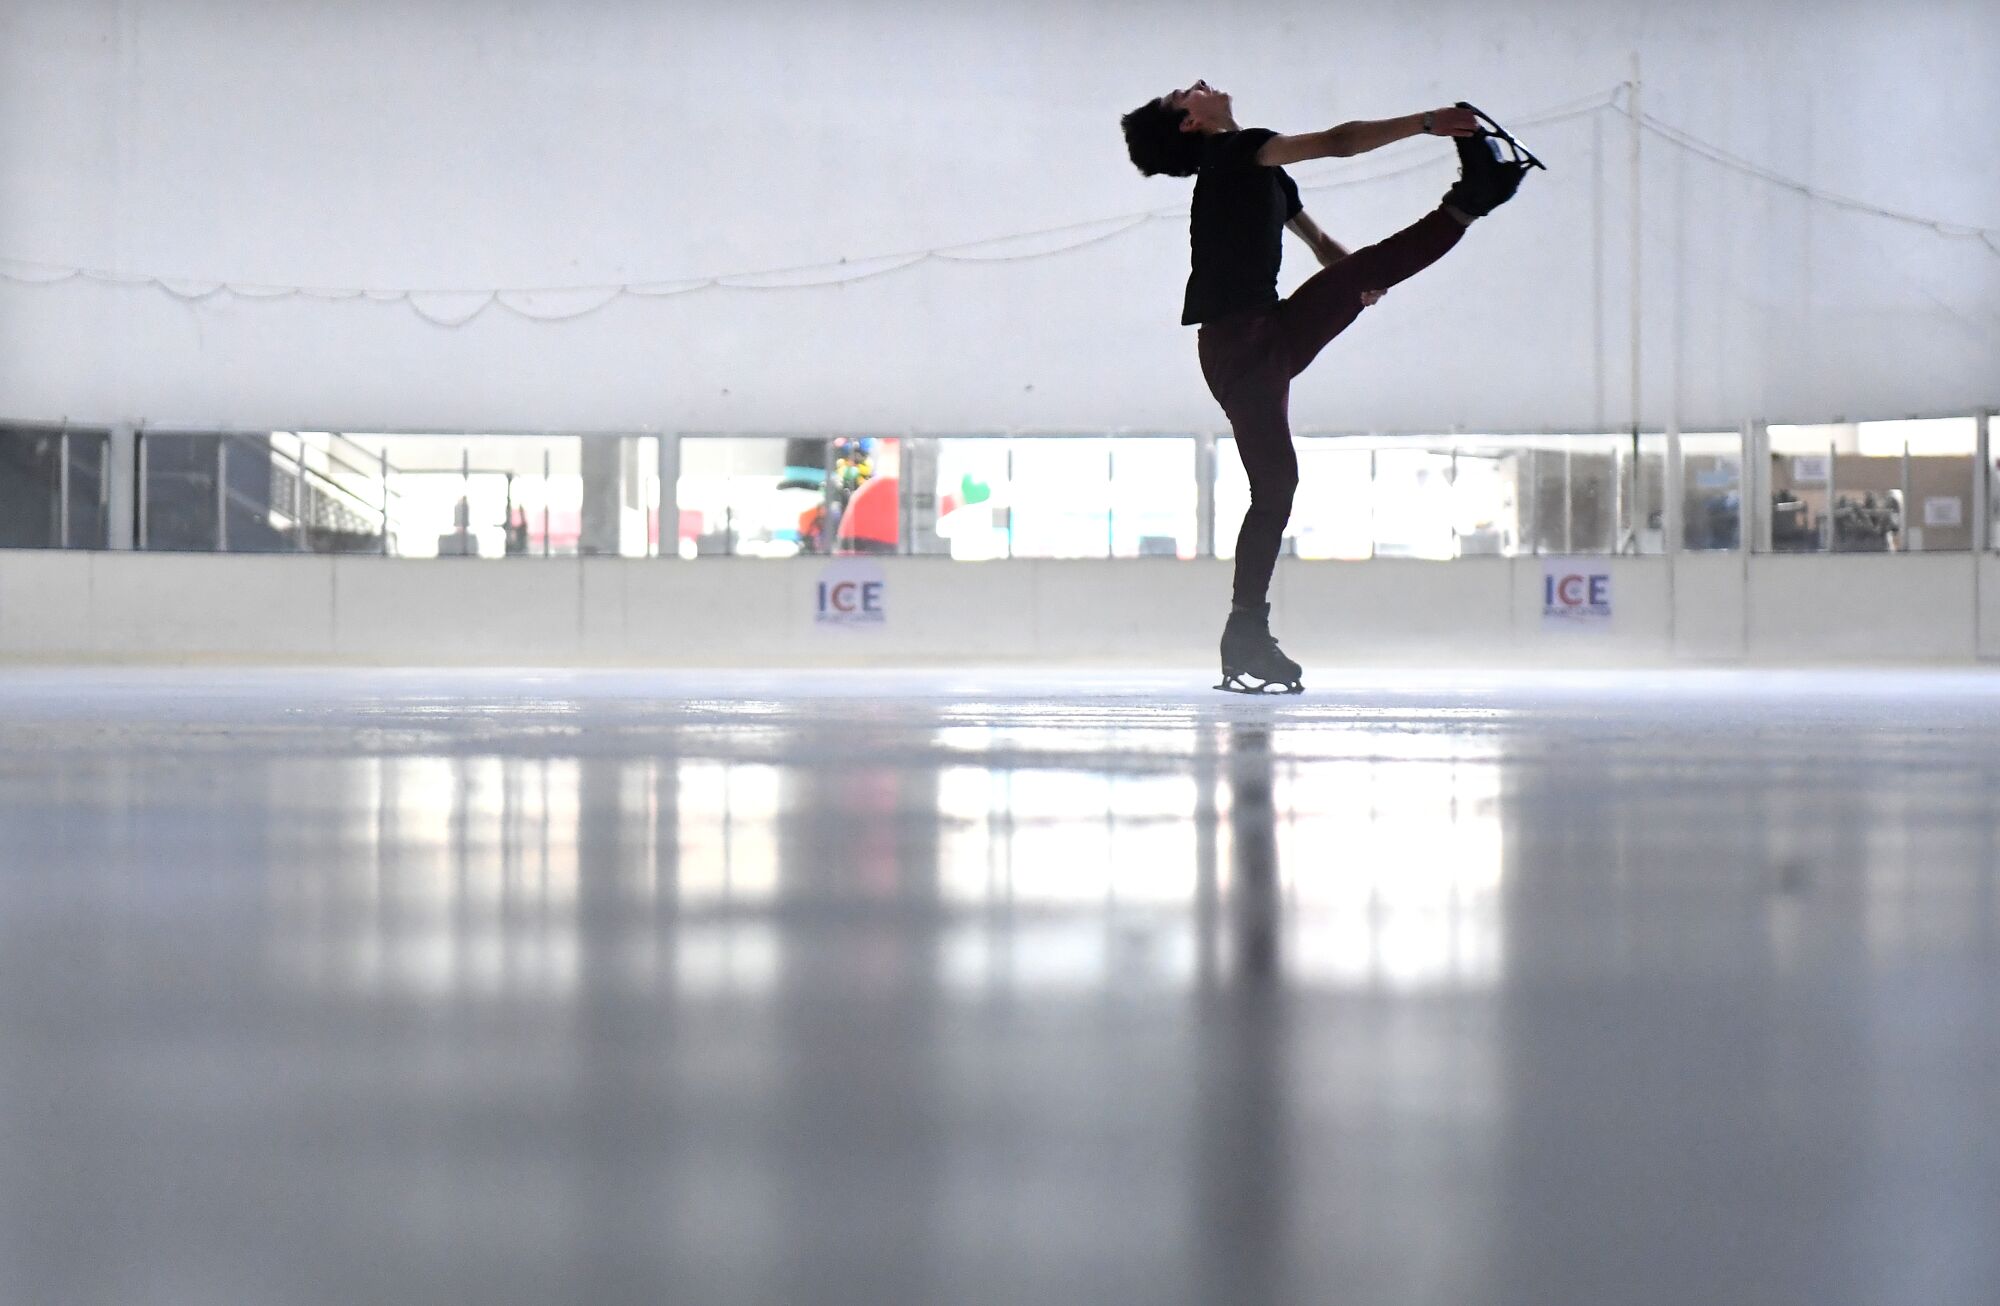 Mexican figure skater Donovan Carrillo practices at an ice rink in a shopping mall in León, Mexico.